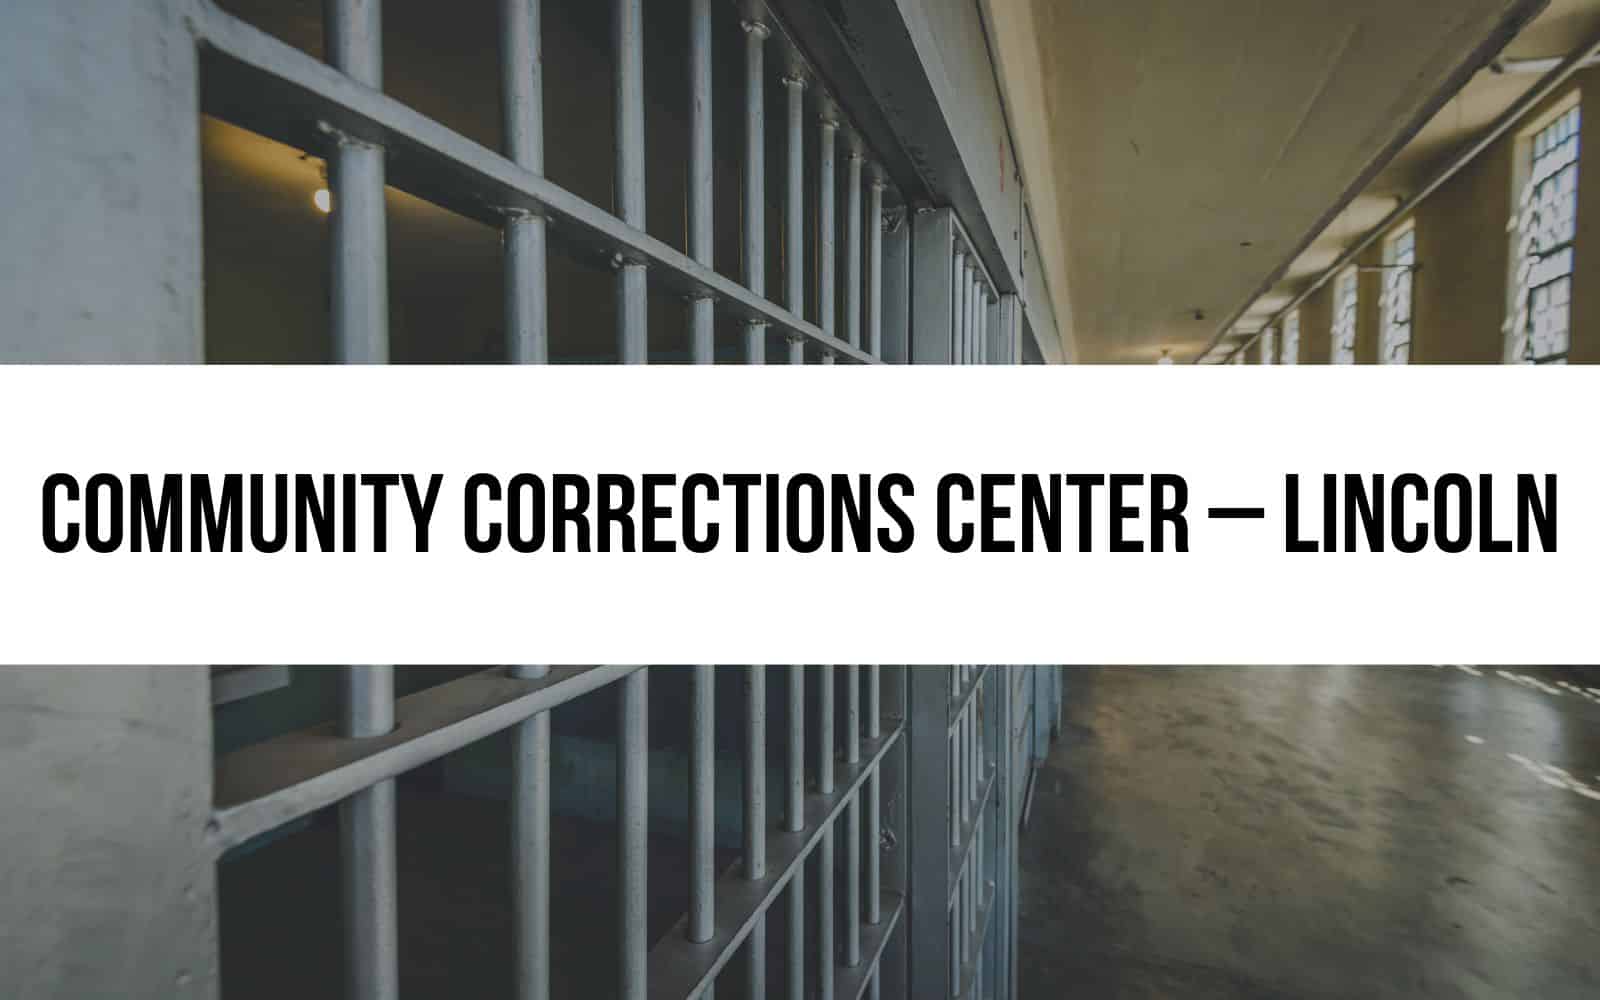 community corrections center - lincoln